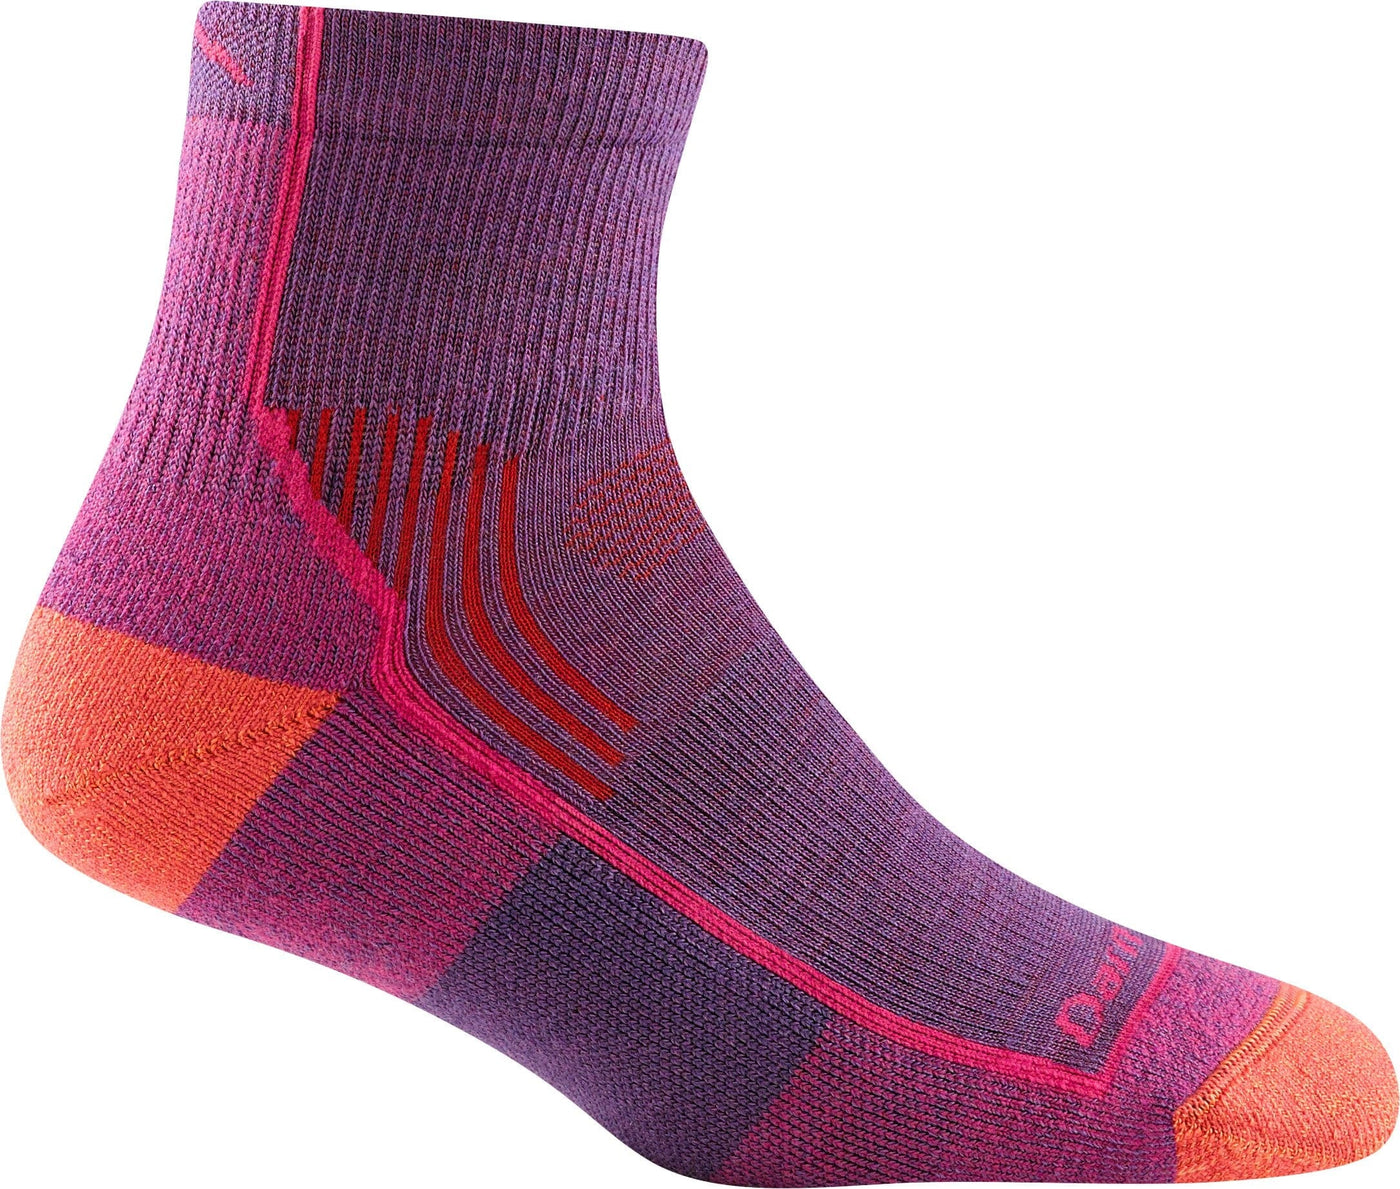 Hiker 1/4 Midweight With Cushion | Women's - Knock Your Socks Off